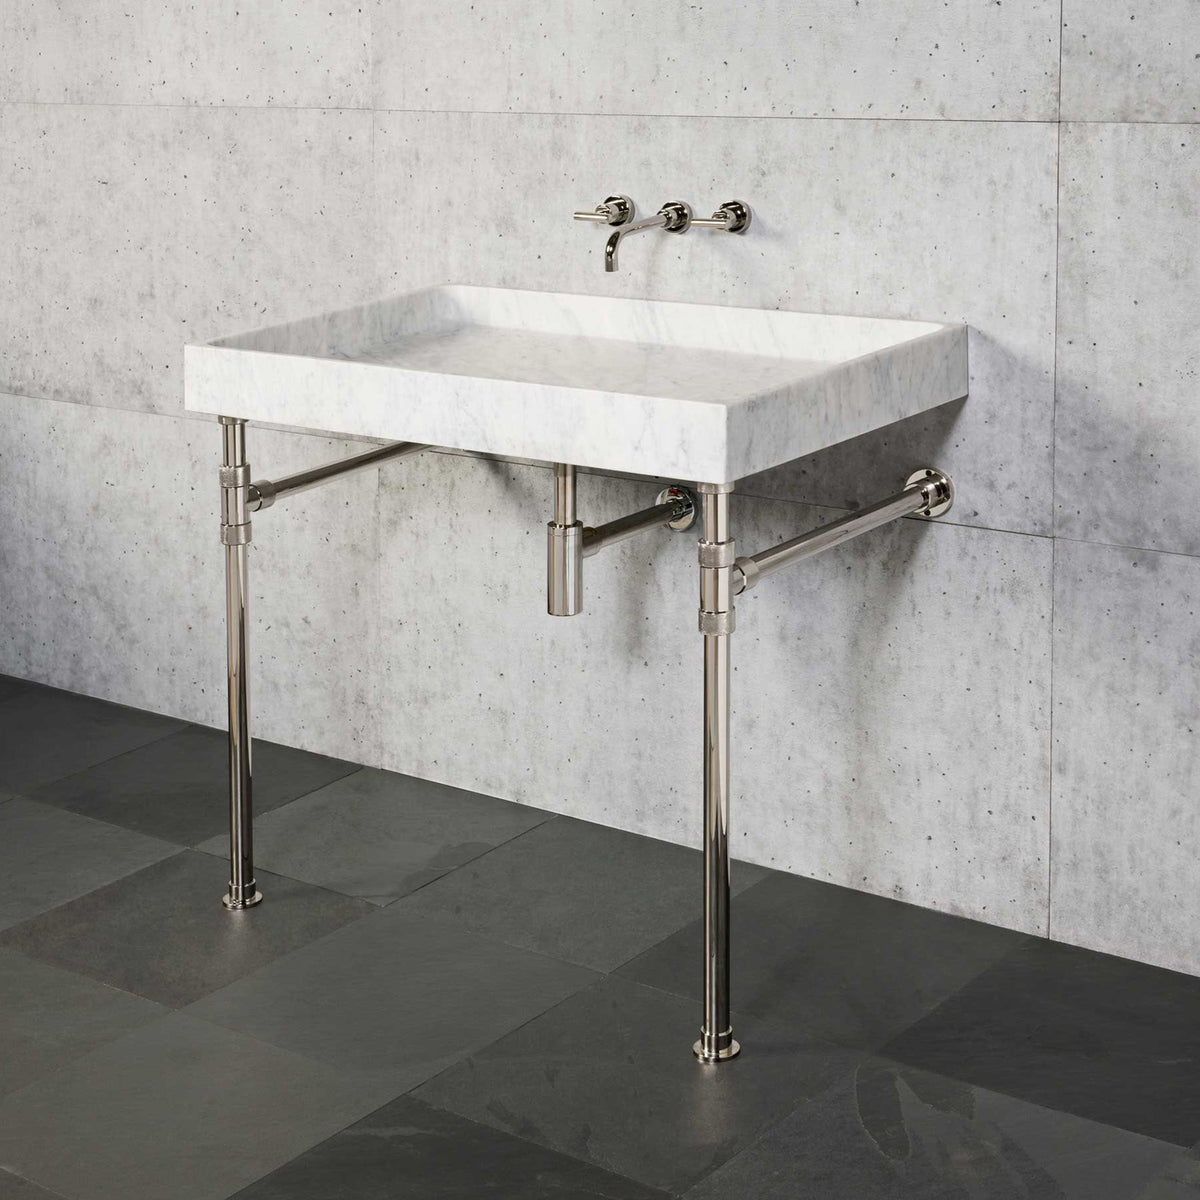 Ventus Bath Sink paired with Elemental Classic Vanity Legs image 1 of 4